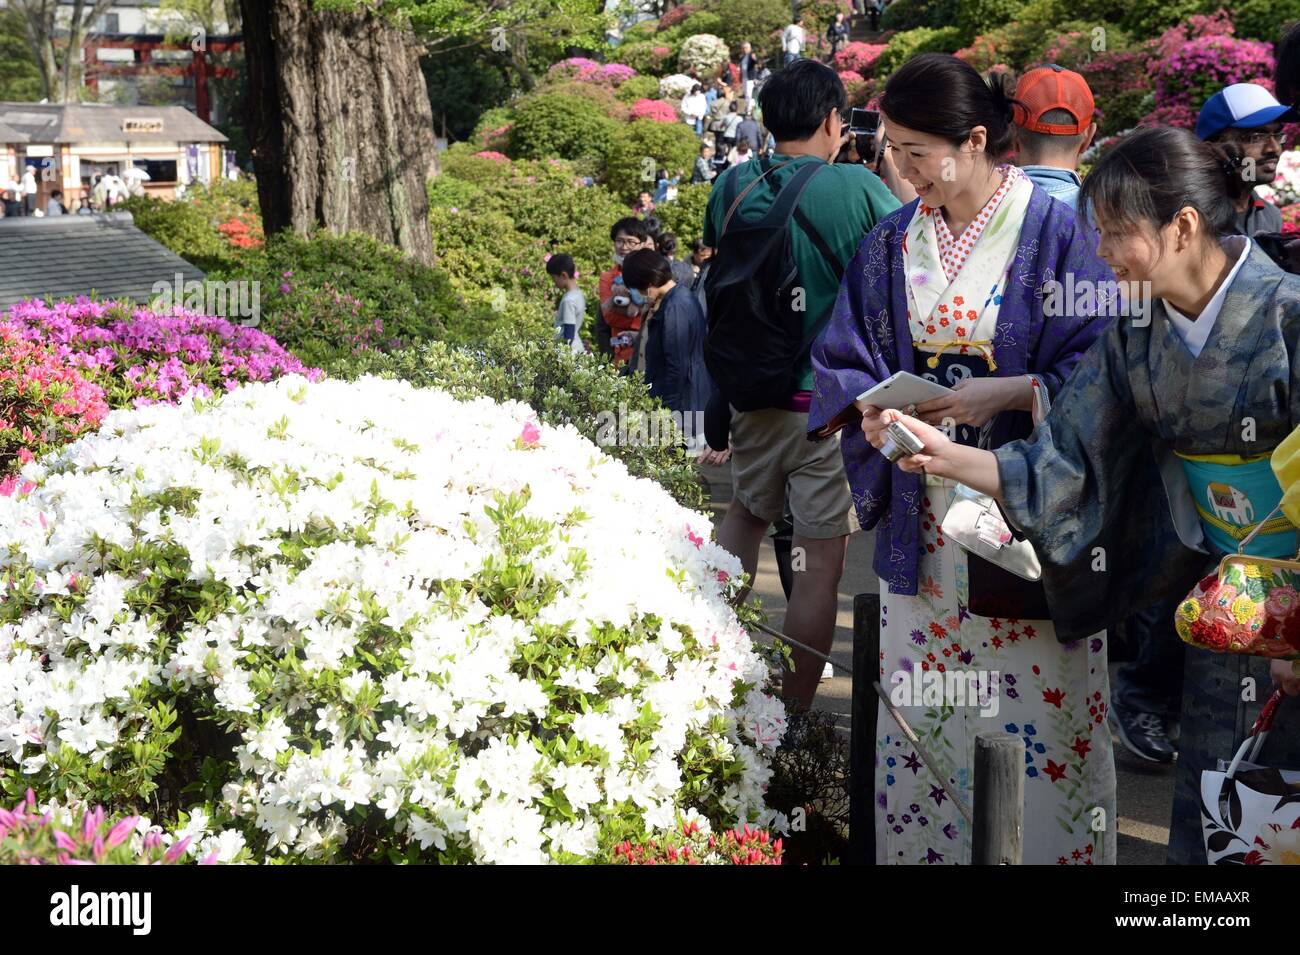 Tokyo, Japan. 18th Apr, 2015. Visitors appreciate Rhododendron flowers at the Nedu Jinja in Tokyo, Japan, April 18, 2015. Around 1000 species of rhododendron are in blossom here. © Ma Ping/Xinhua/Alamy Live News Stock Photo